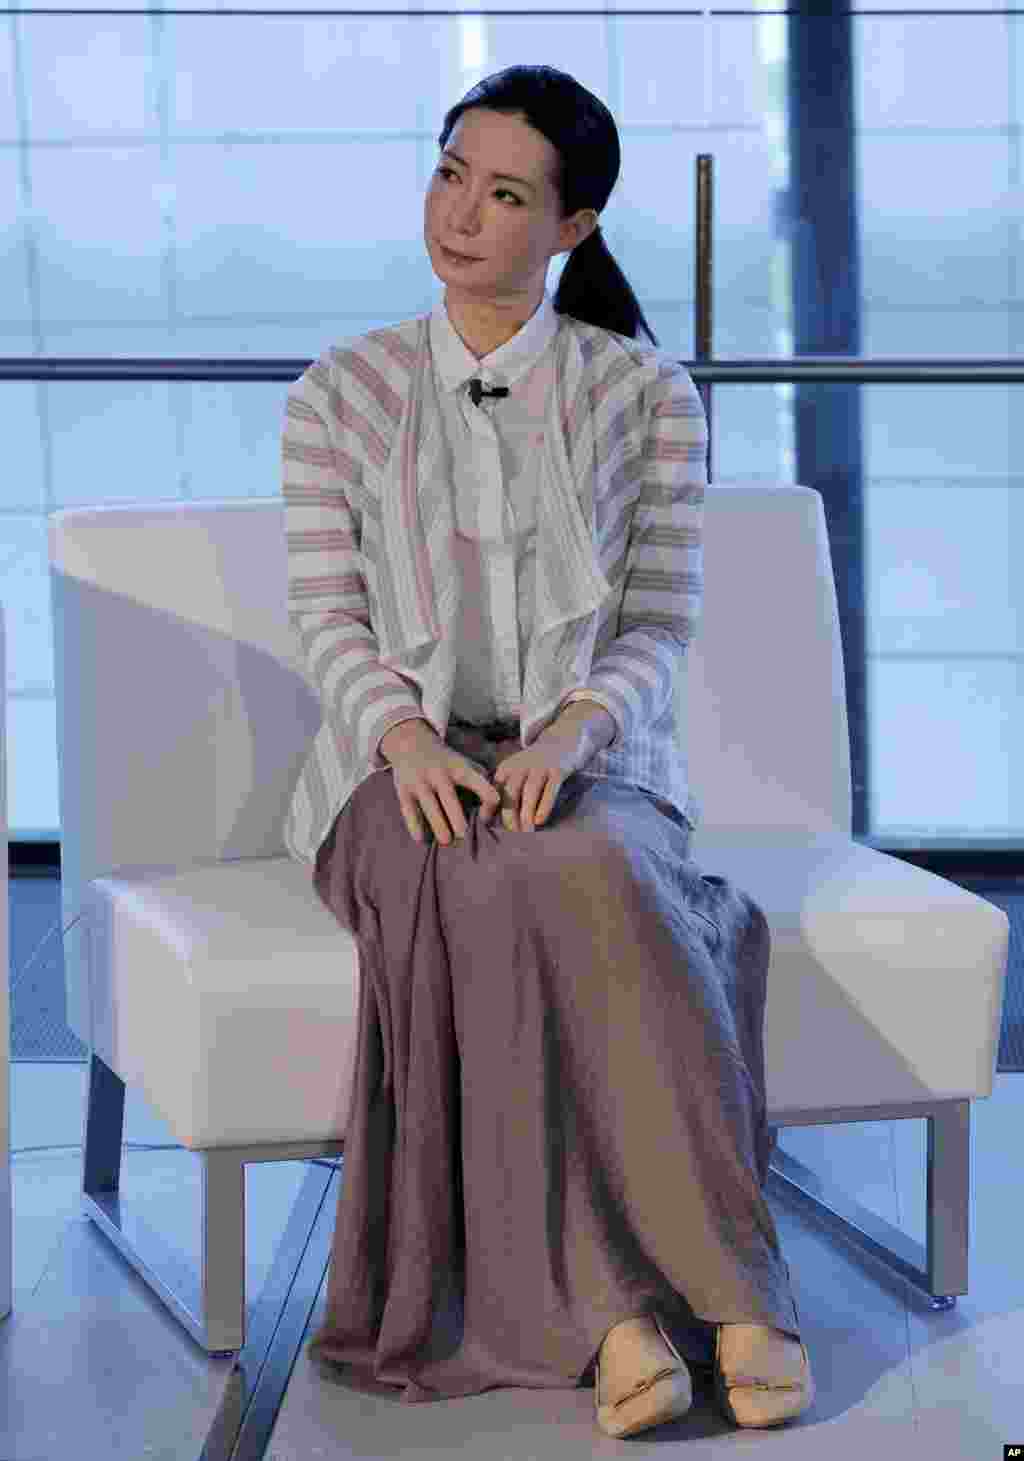 A female-announcer robot called Otonaroid speaks during a press event at the National Museum of Emerging Science and Innovation Miraikan in Tokyo, Japan. The latest creations from Japanese android expert Hiroshi Ishiguro are the Otonaroid, a girl robot called Kodomoroid and Telenoid, a hairless mannequin head with pointed arms that serves as a cuddly companion.